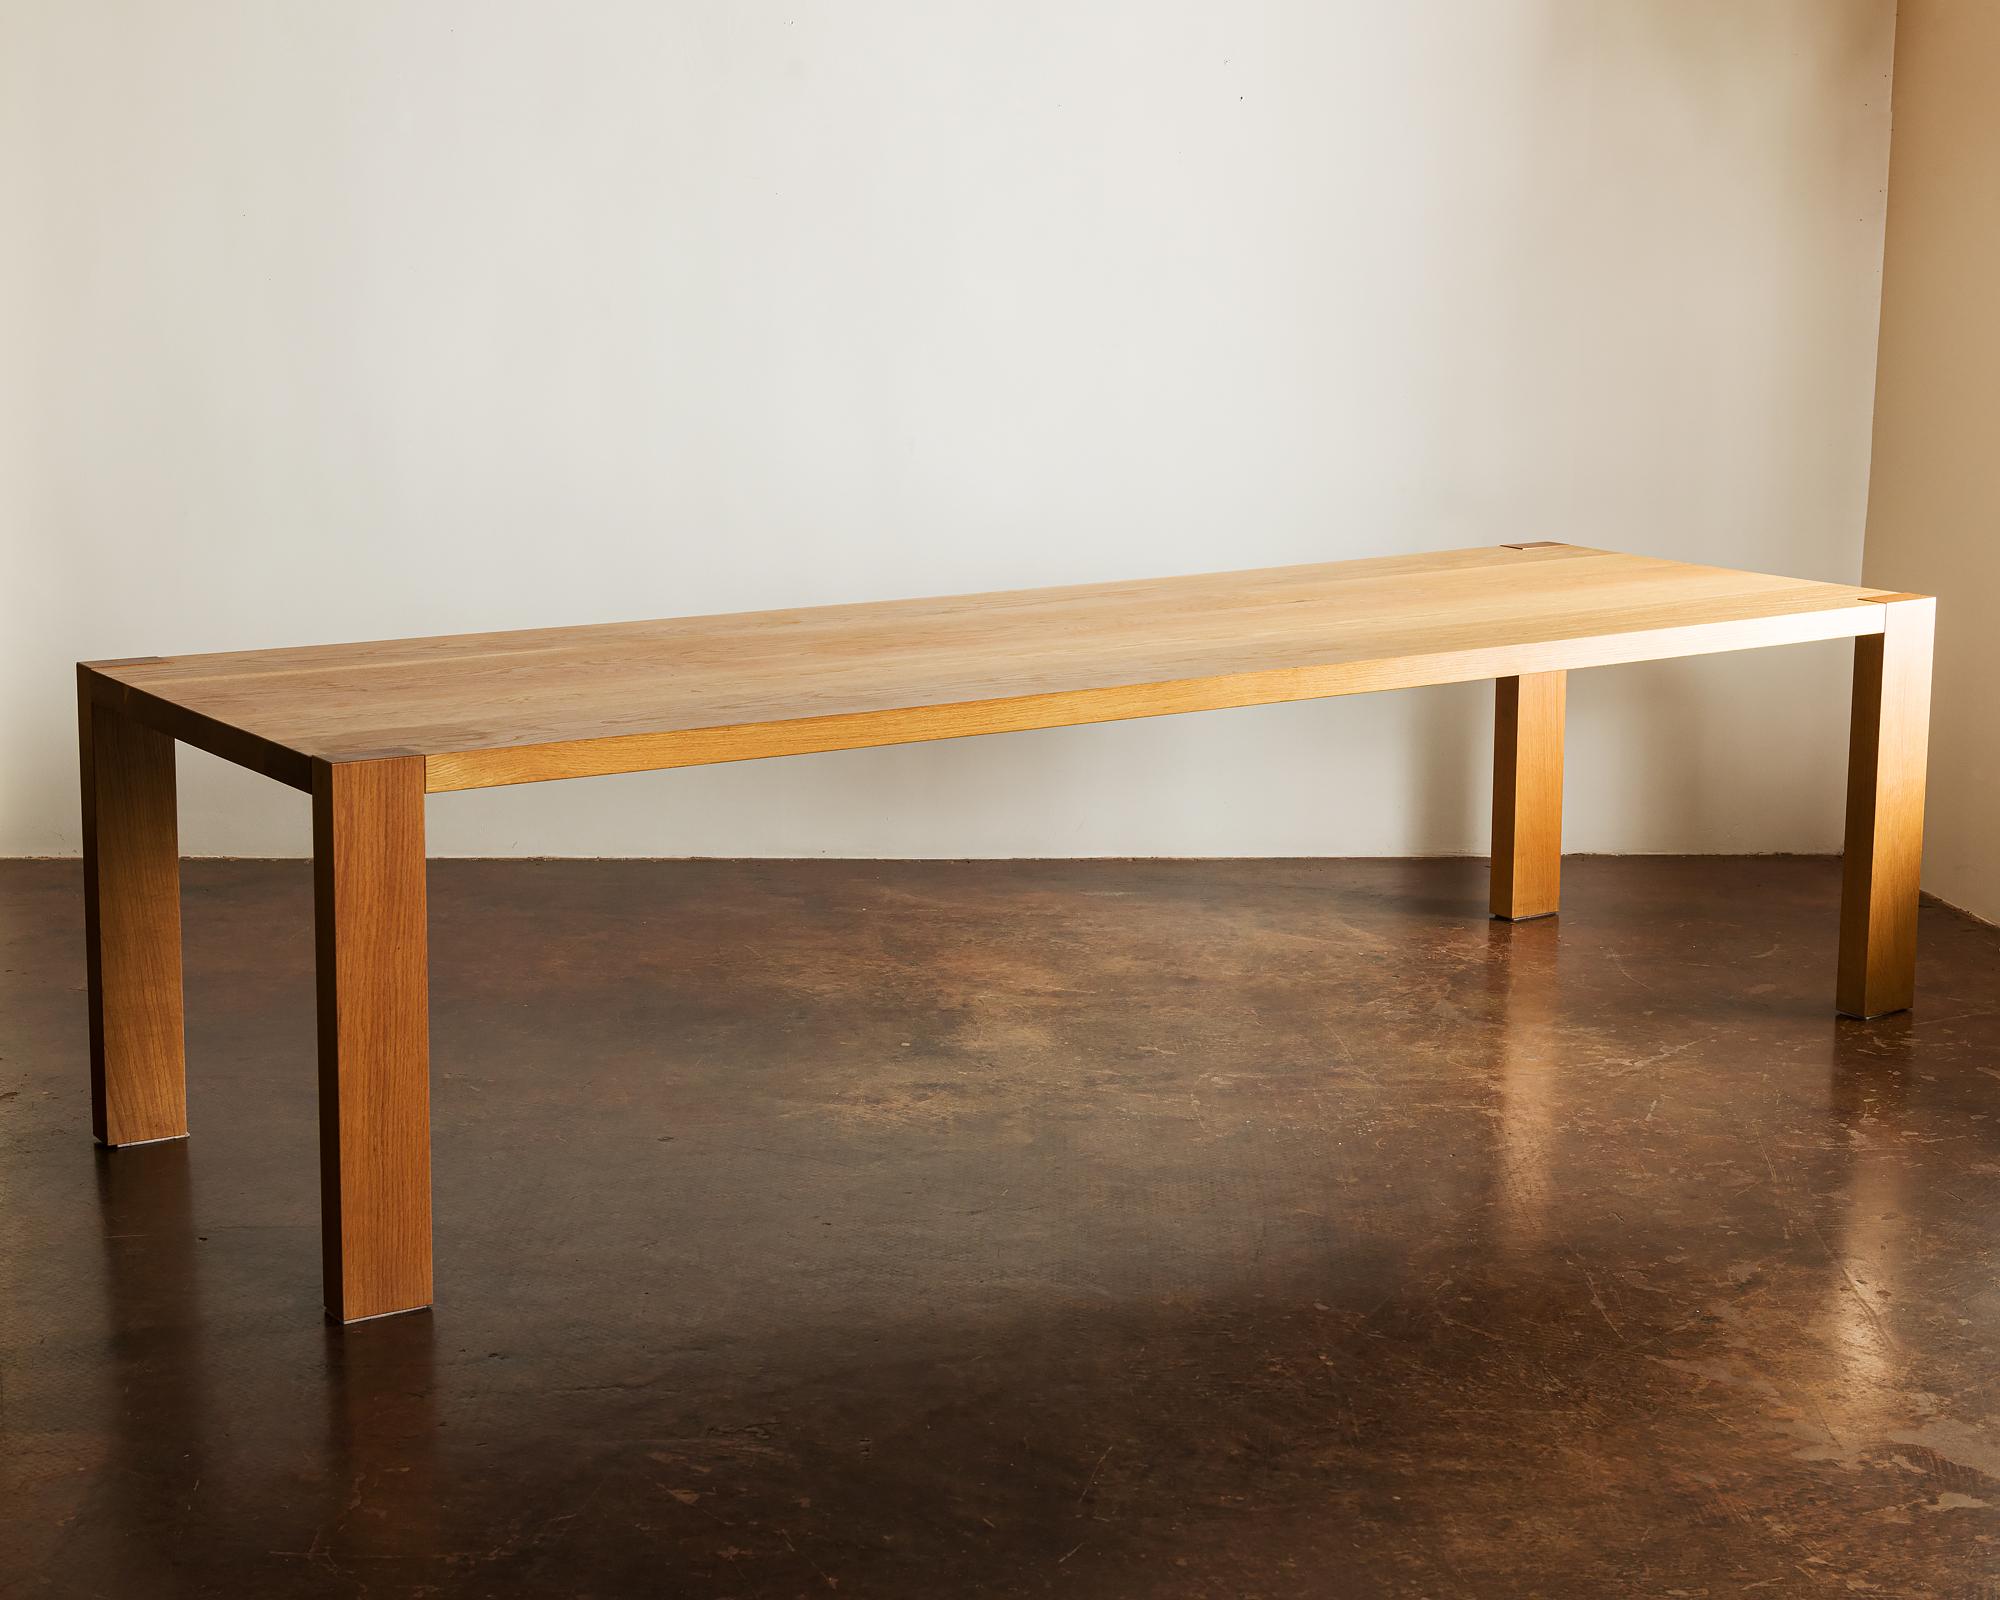 Simple, modern piece designed by Lauren Hunt and manufactured by John Norton, a noted California woodworker. Crafted from solid oak with a natural wax finish.

Available in custom sizes with 12-14 week lead time.